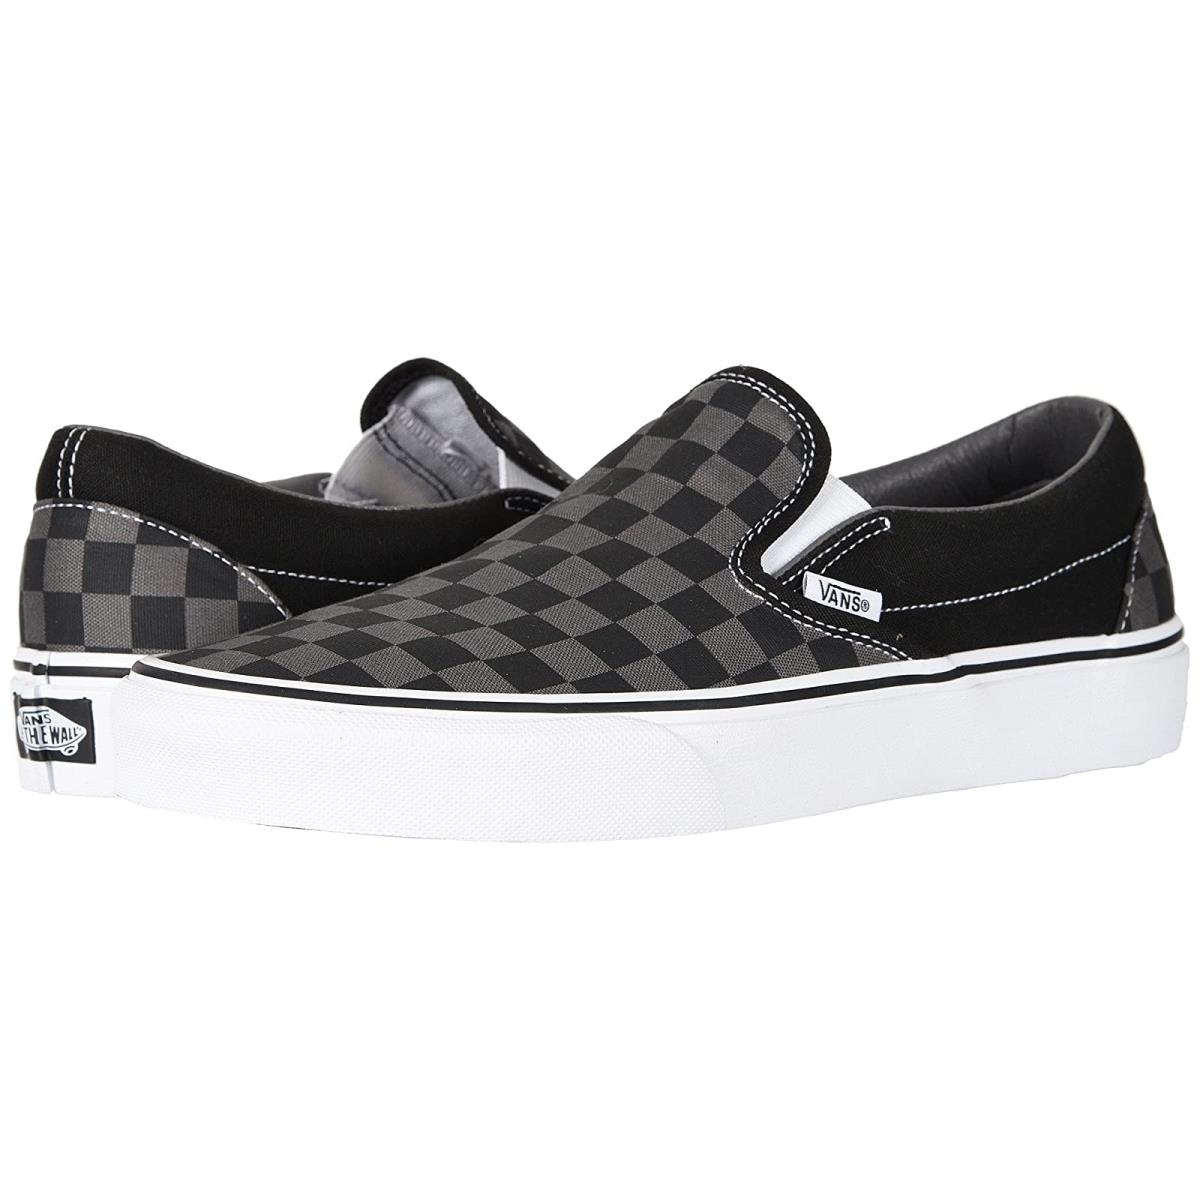 Unisex Sneakers Athletic Shoes Vans Classic Slip-on Core Classics (Checkerboard) Black/Pewter